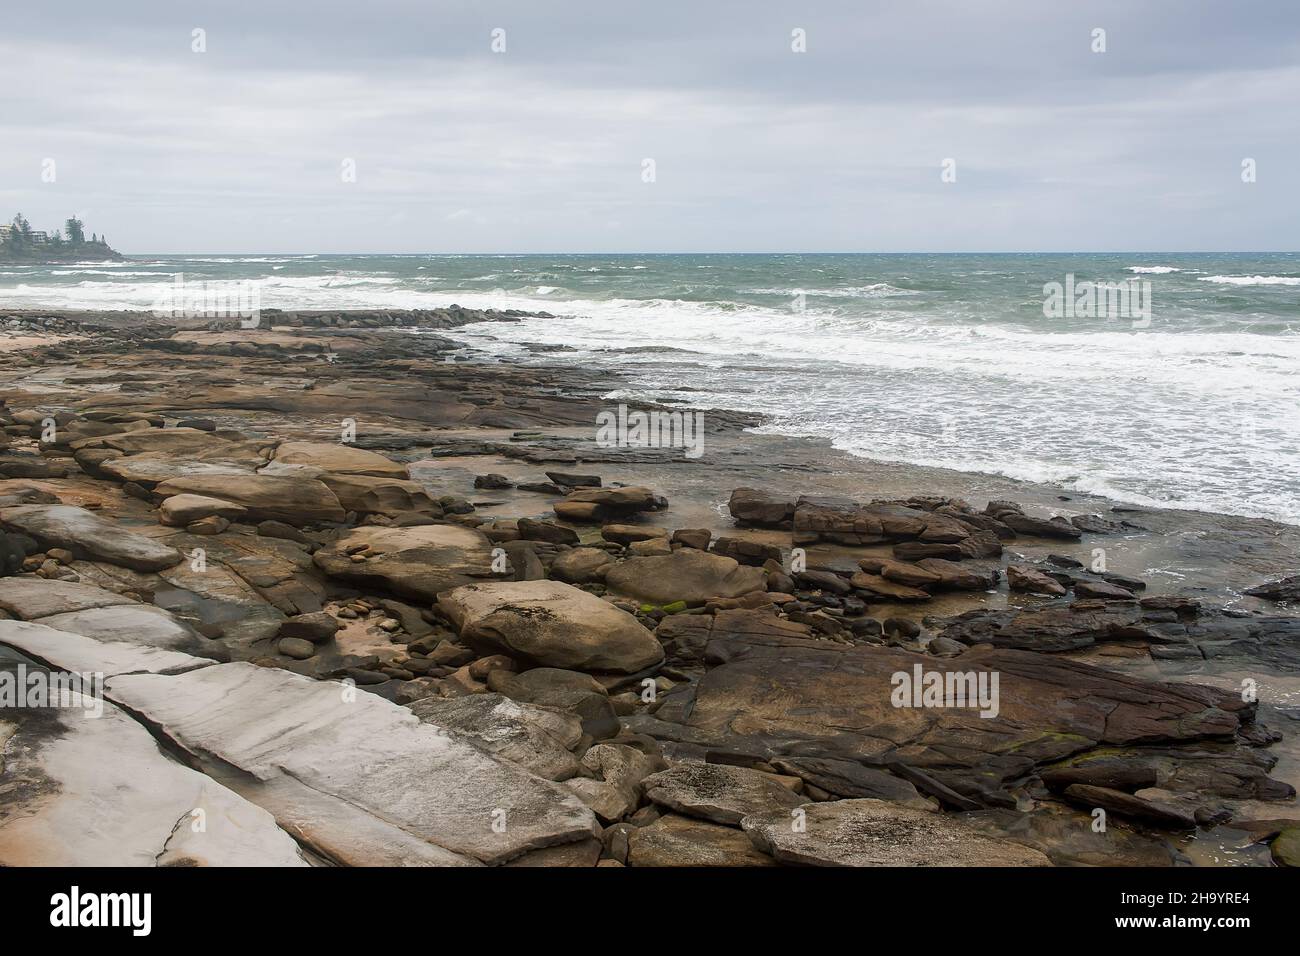 The wind is getting stronger and the waves splash to the shore on the rocky beach. Stock Photo